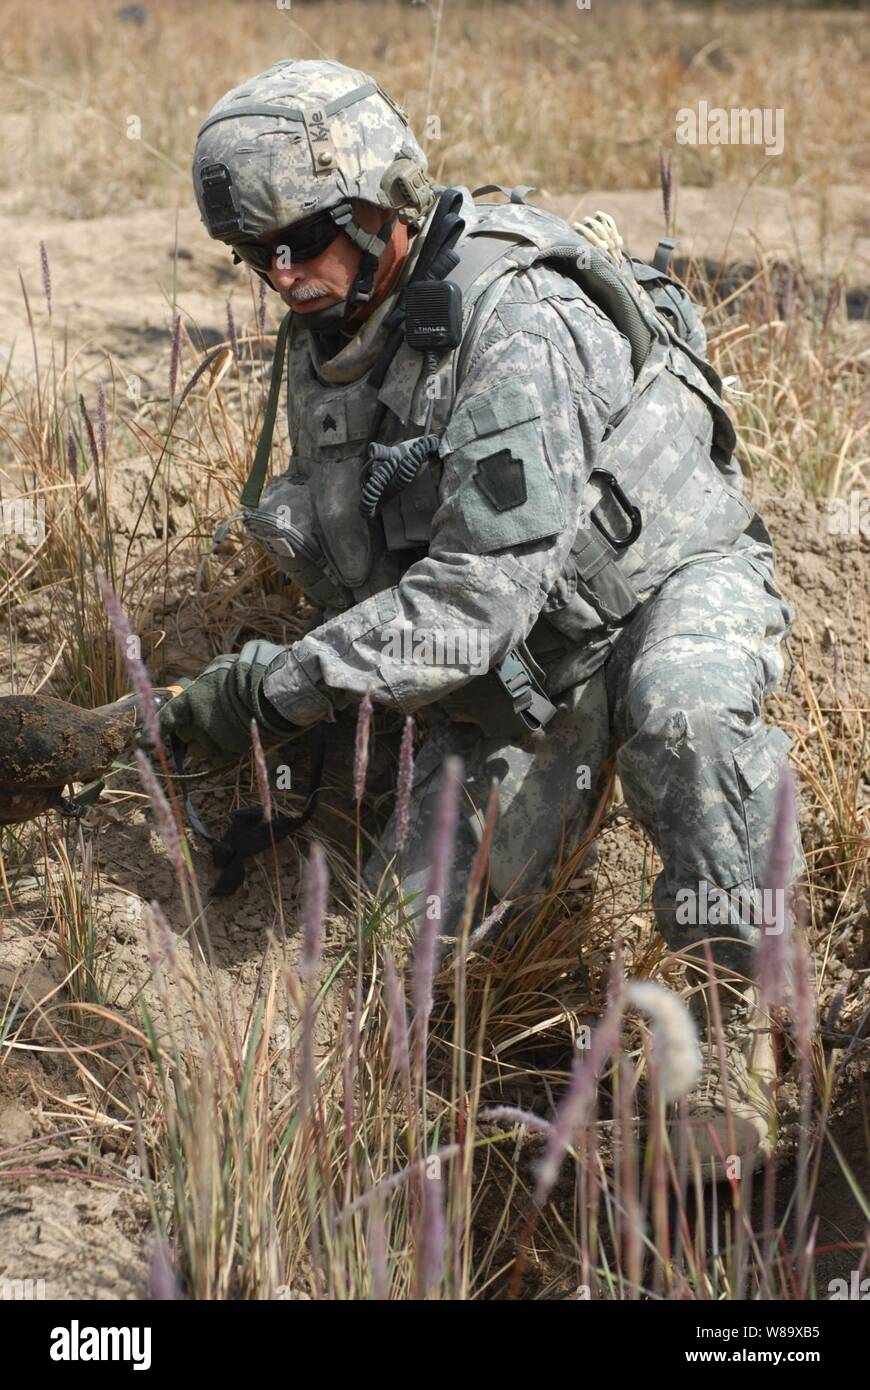 U.S. Army Sgt. Timothy Kyle from the 2nd Brigade Combat Team, 1st Infantry Division digs in a site of possible weapons caches in the city of Abu Ghraib, Iraq, on March 21, 2009. Stock Photo